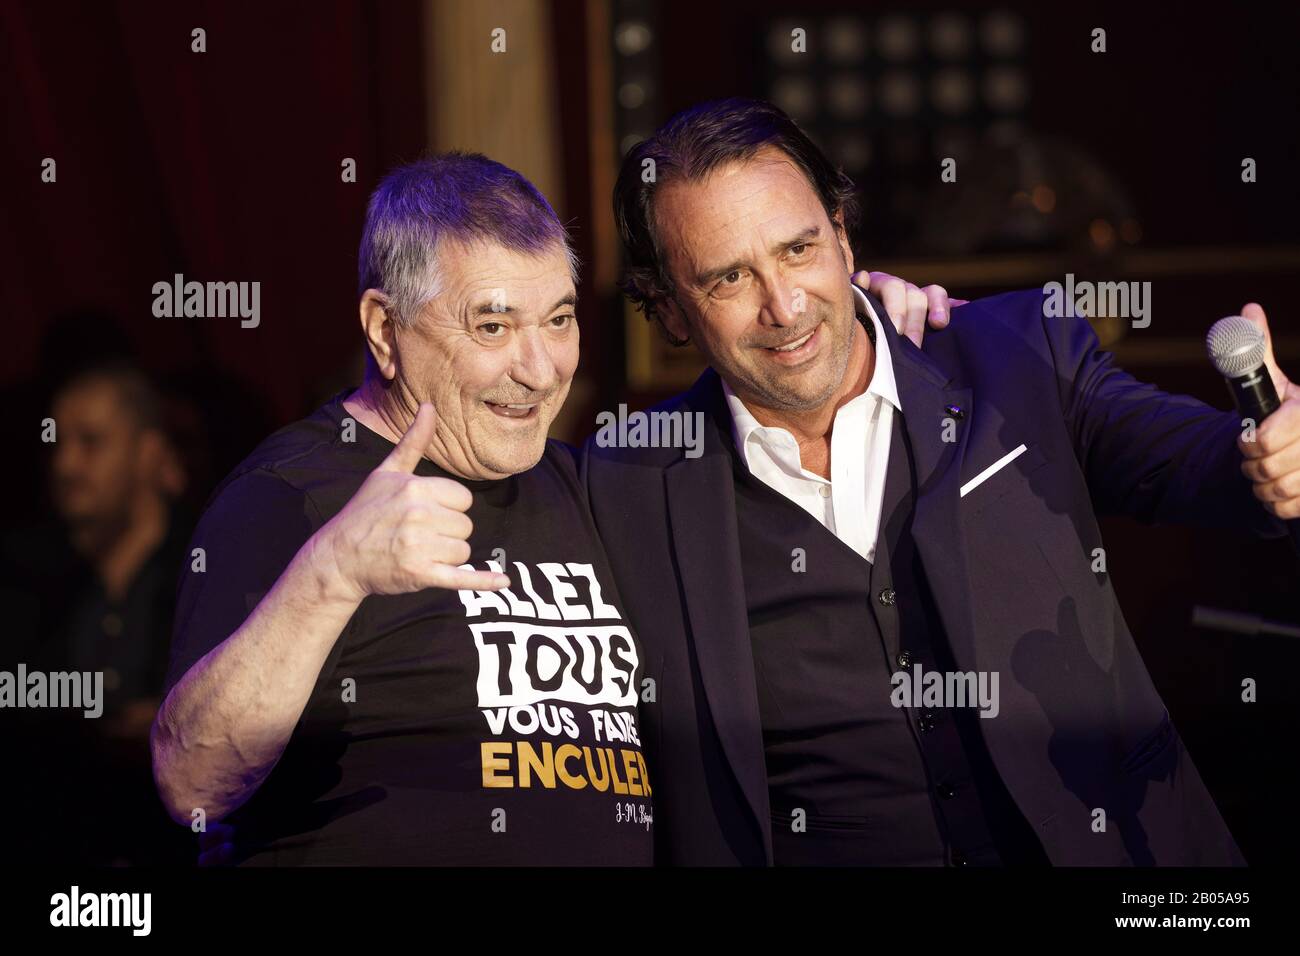 Paris, France. 17th Feb, 2020. Comedian Jean Marie Bigard and singer Sebastien El Chato attend Marcel Campion's 80th Birthday Party at Cirque d'Hiver Stock Photo